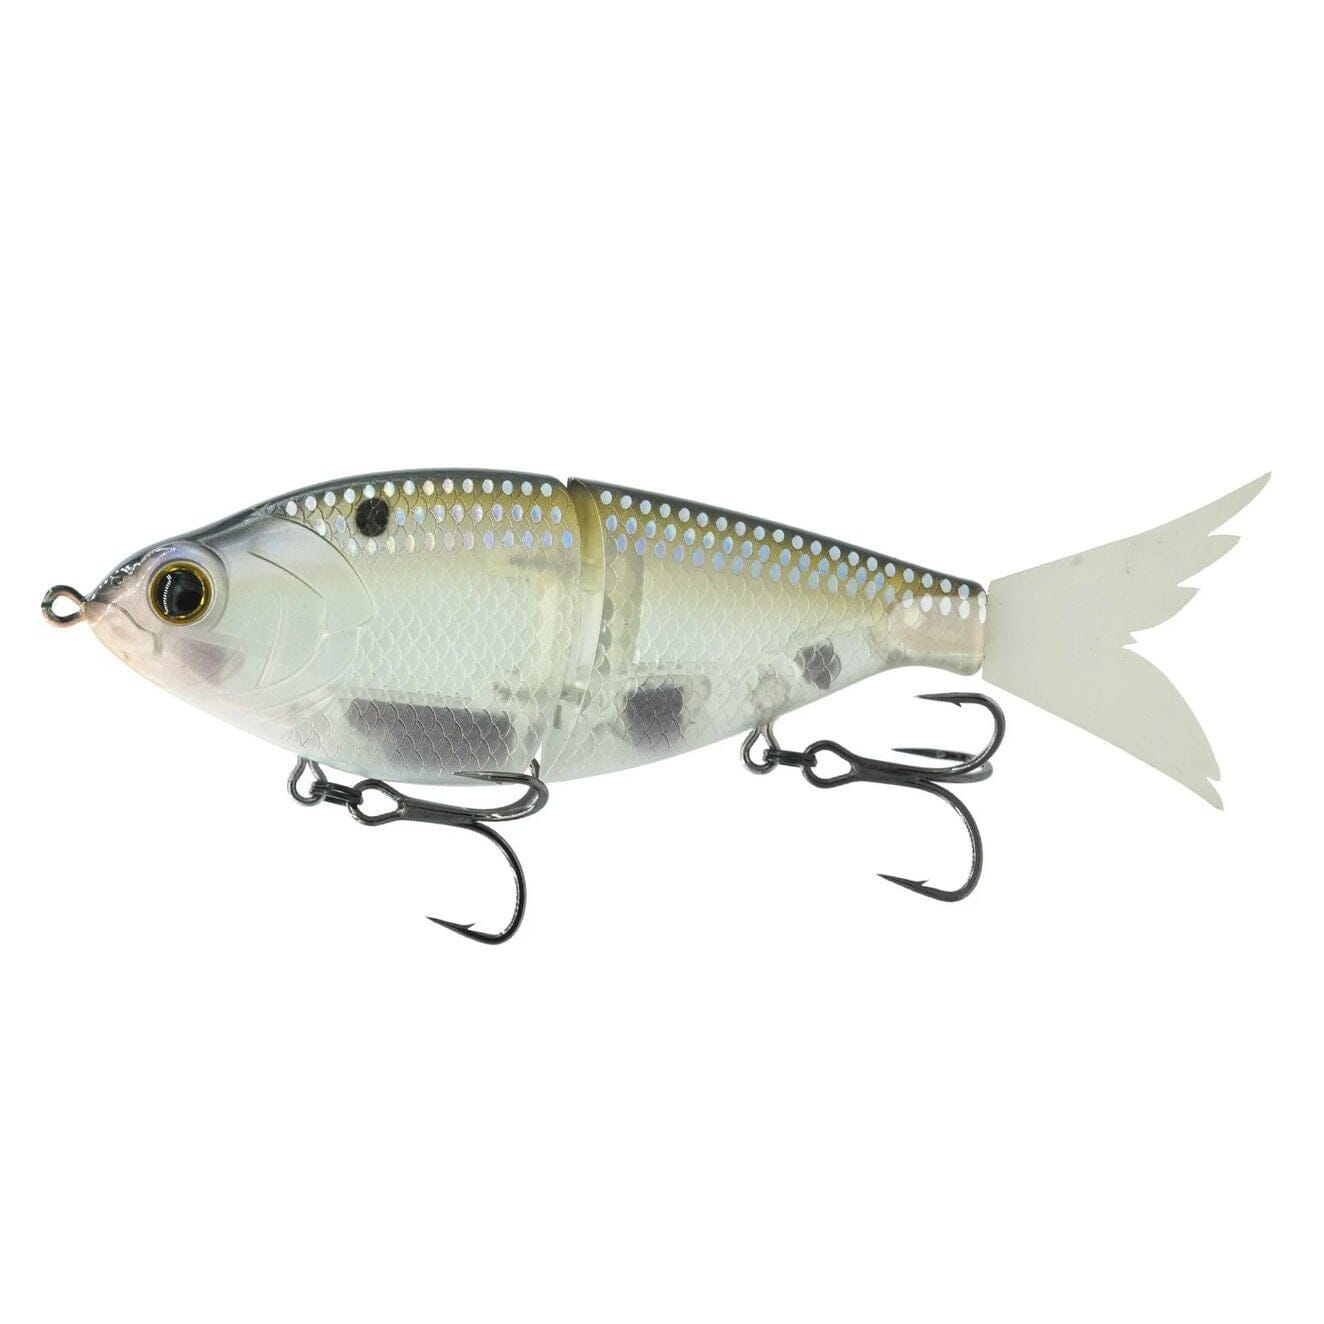 6th Sense - Flow Glider 130 Ghost Shad Scales